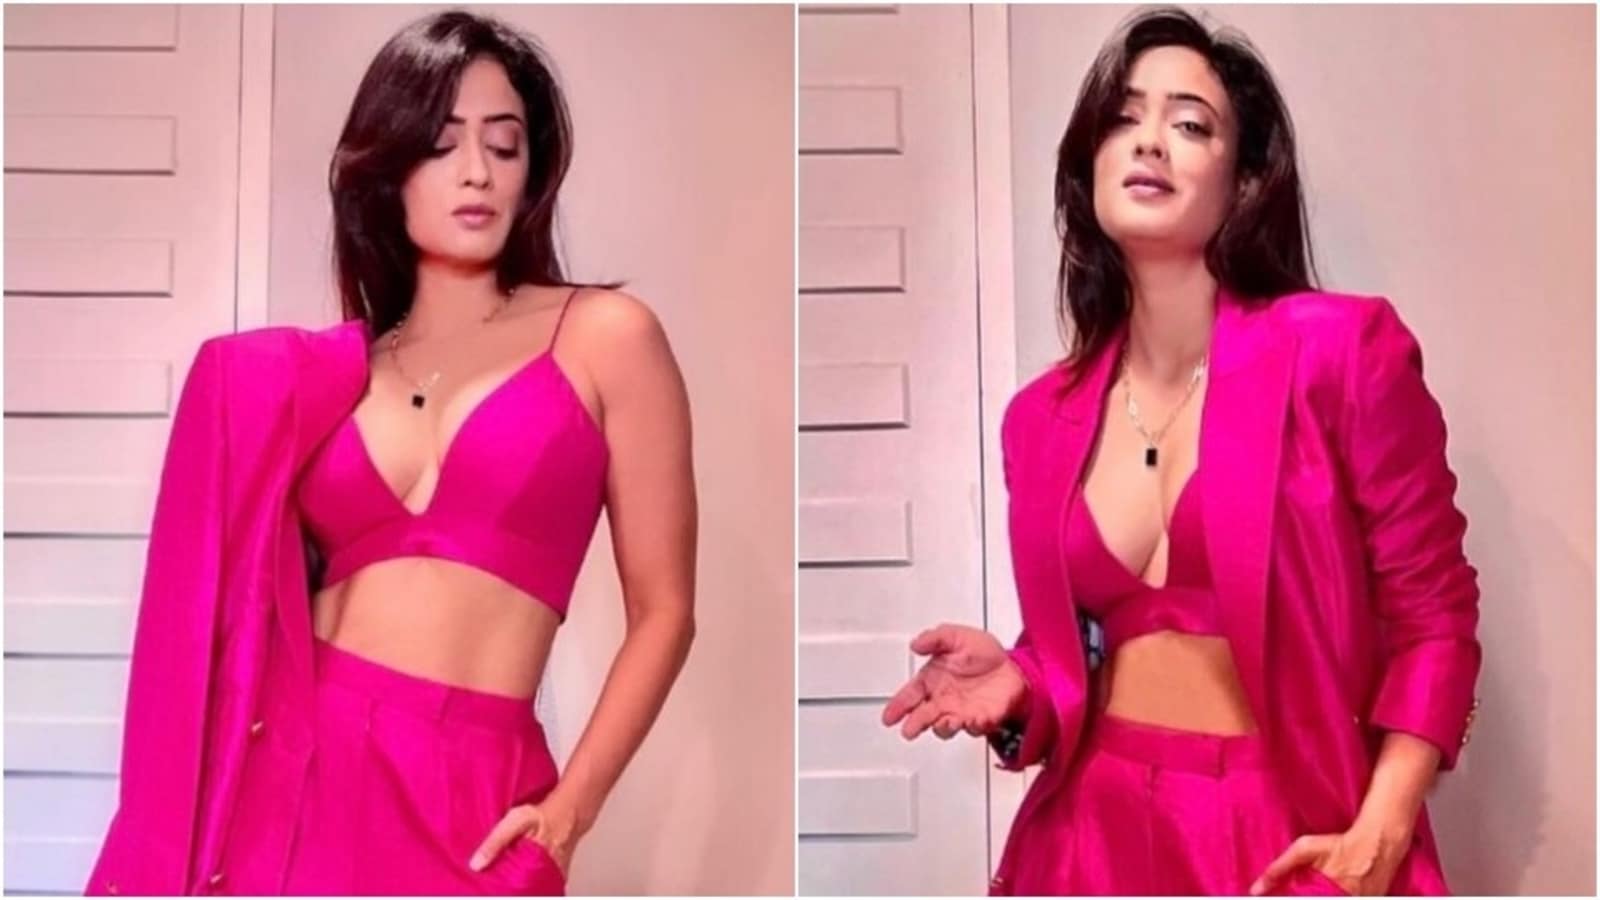 Anuskha Sen Nude Photos - Pics: Shweta Tiwari in hot pink bralette and pants channels her inner boss  lady | Fashion Trends - Hindustan Times